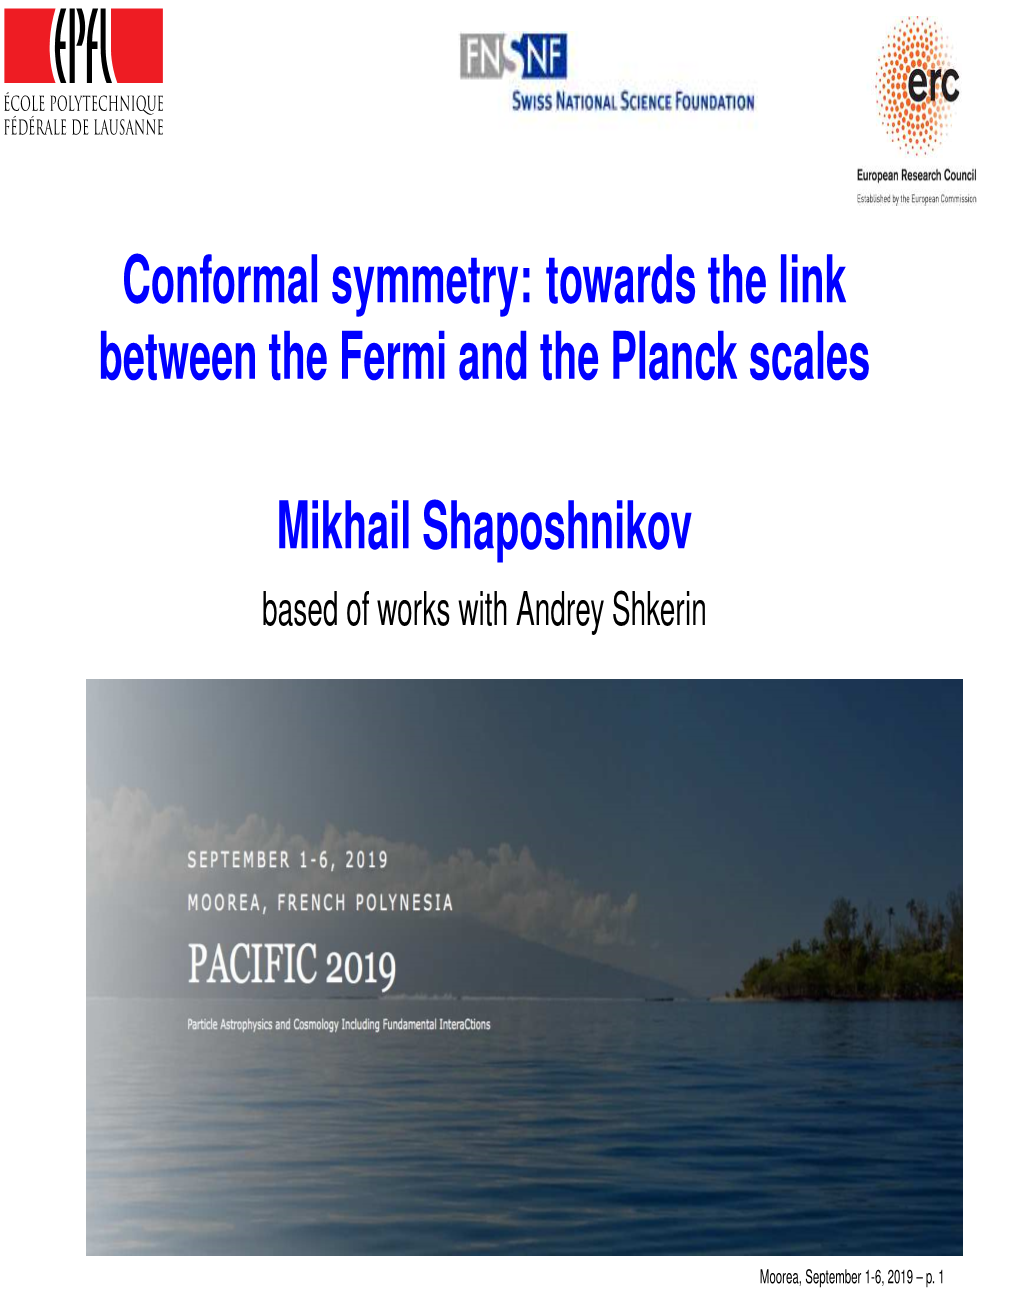 Conformal Symmetry: Towards the Link Between the Fermi and the Planck Scales